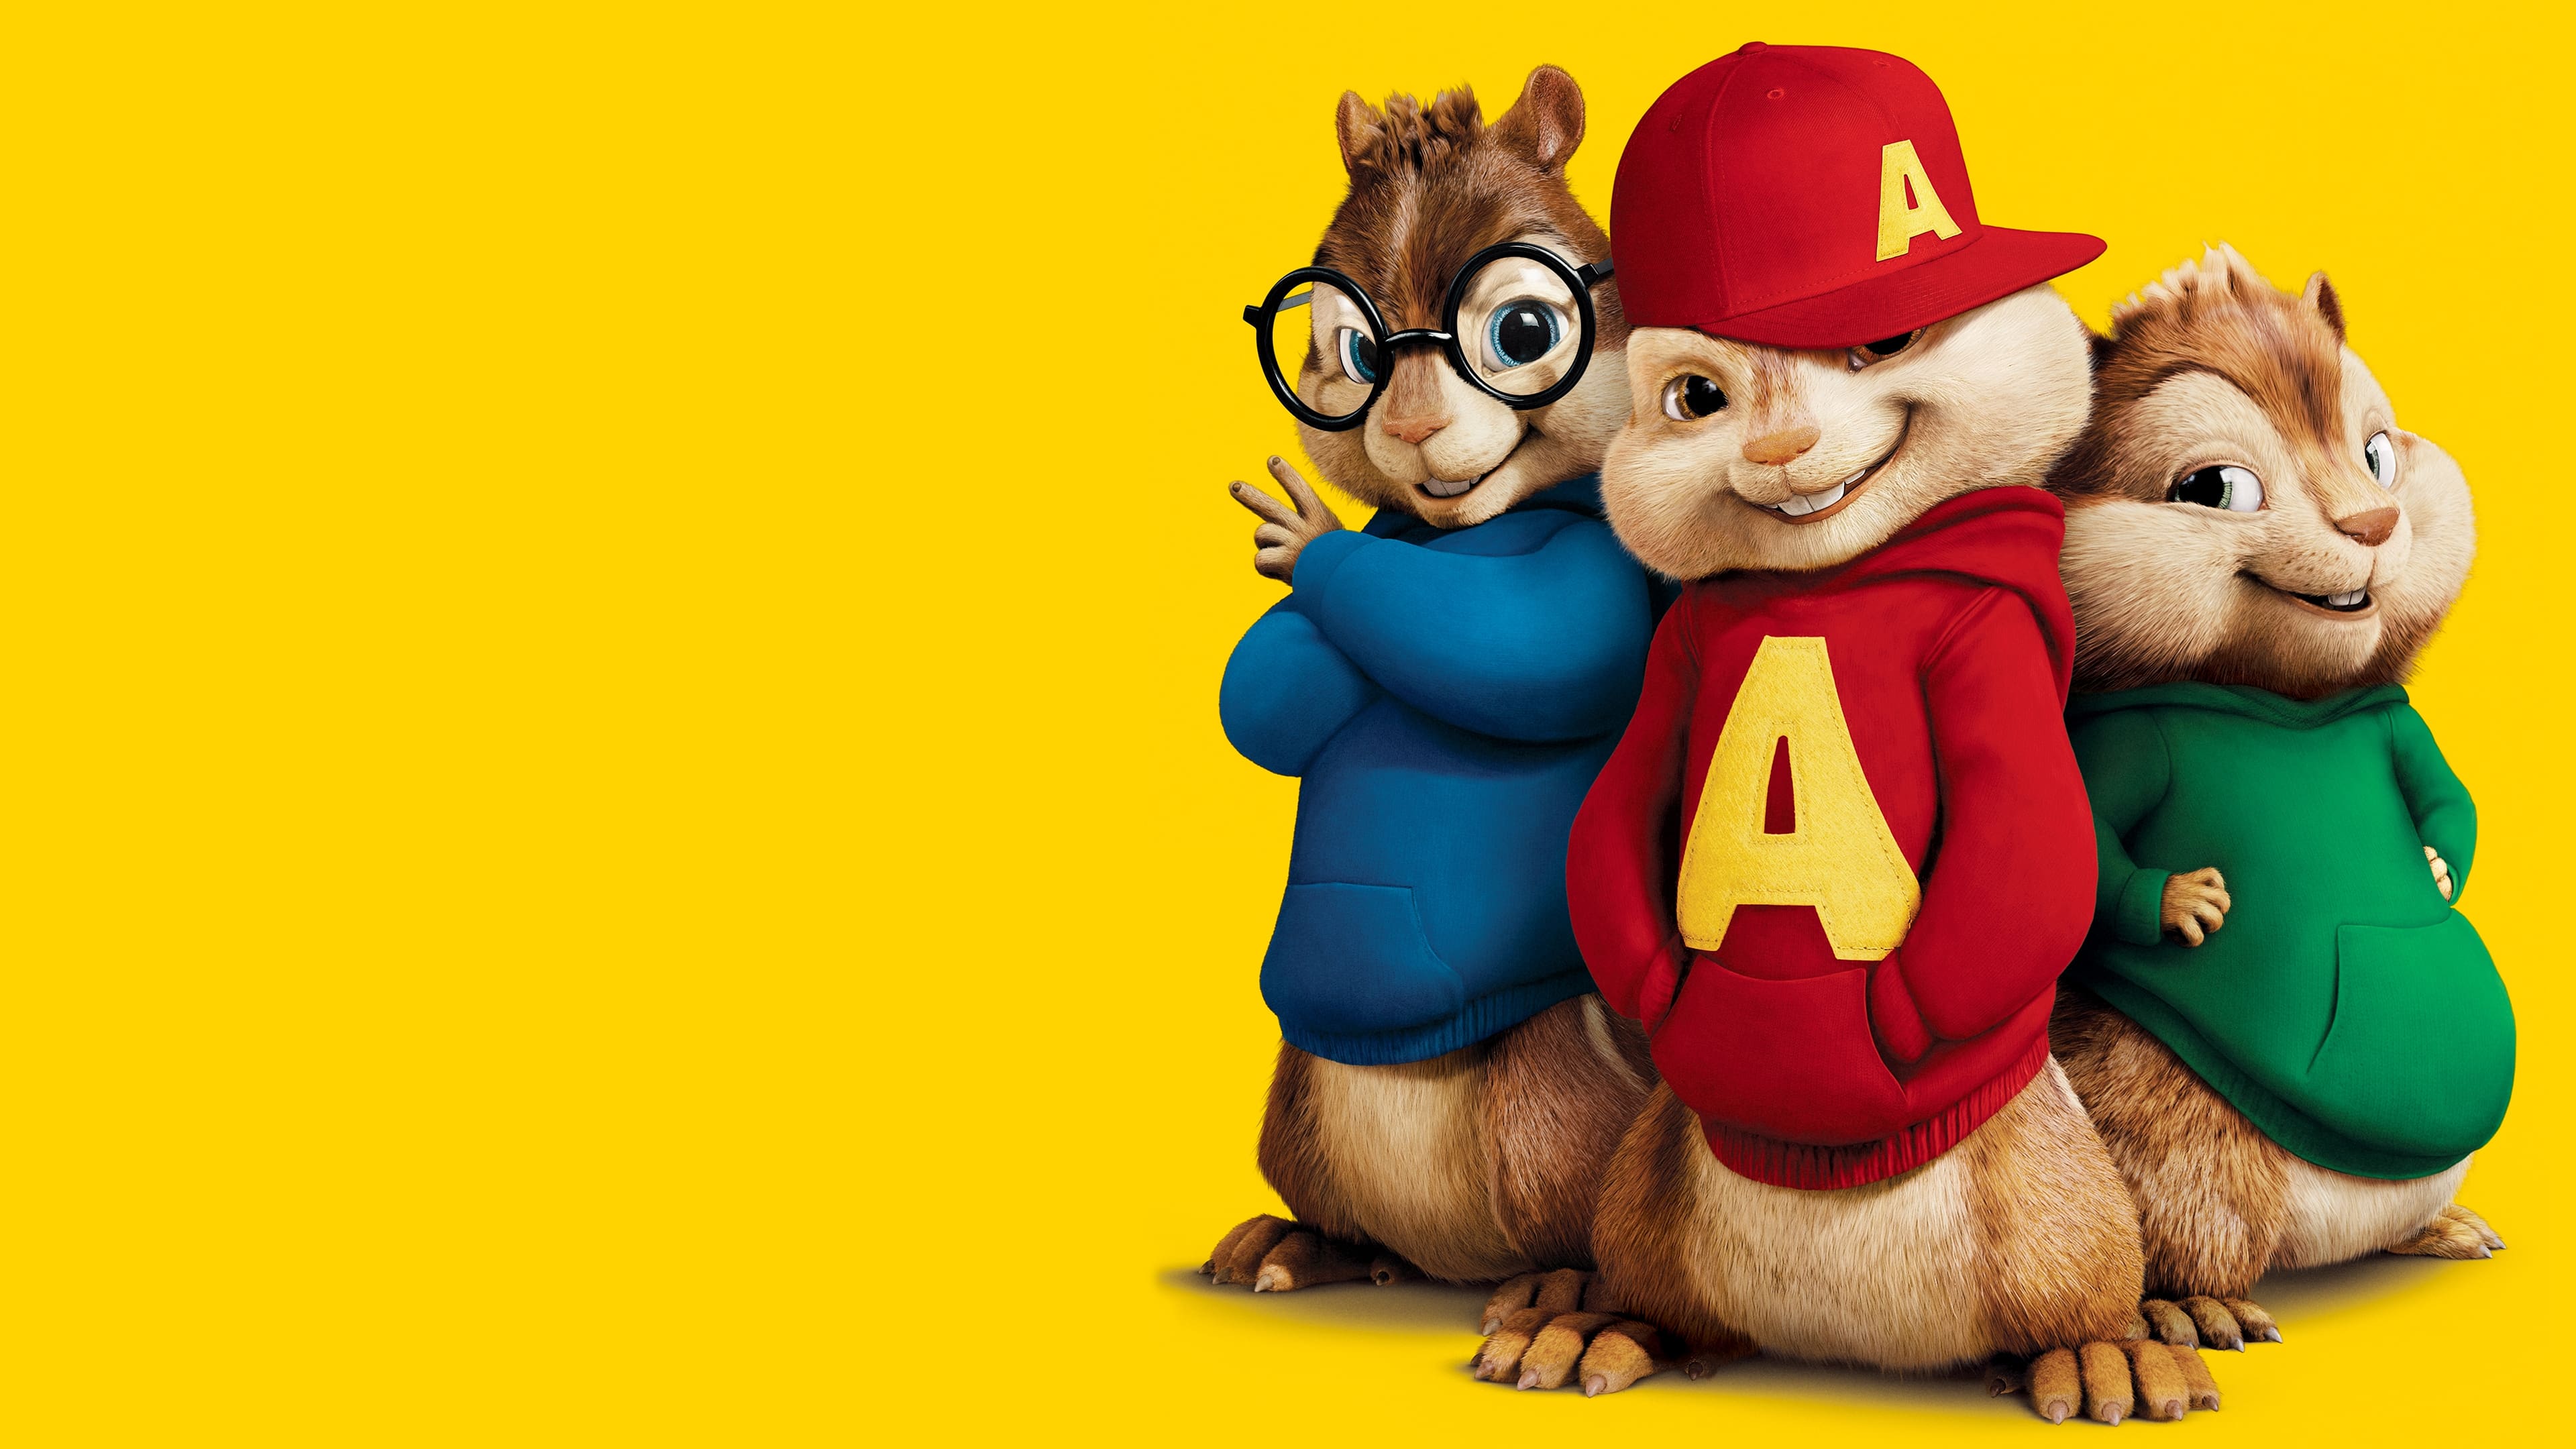 Alvin and the Chipmunks: The Squeakquel. 